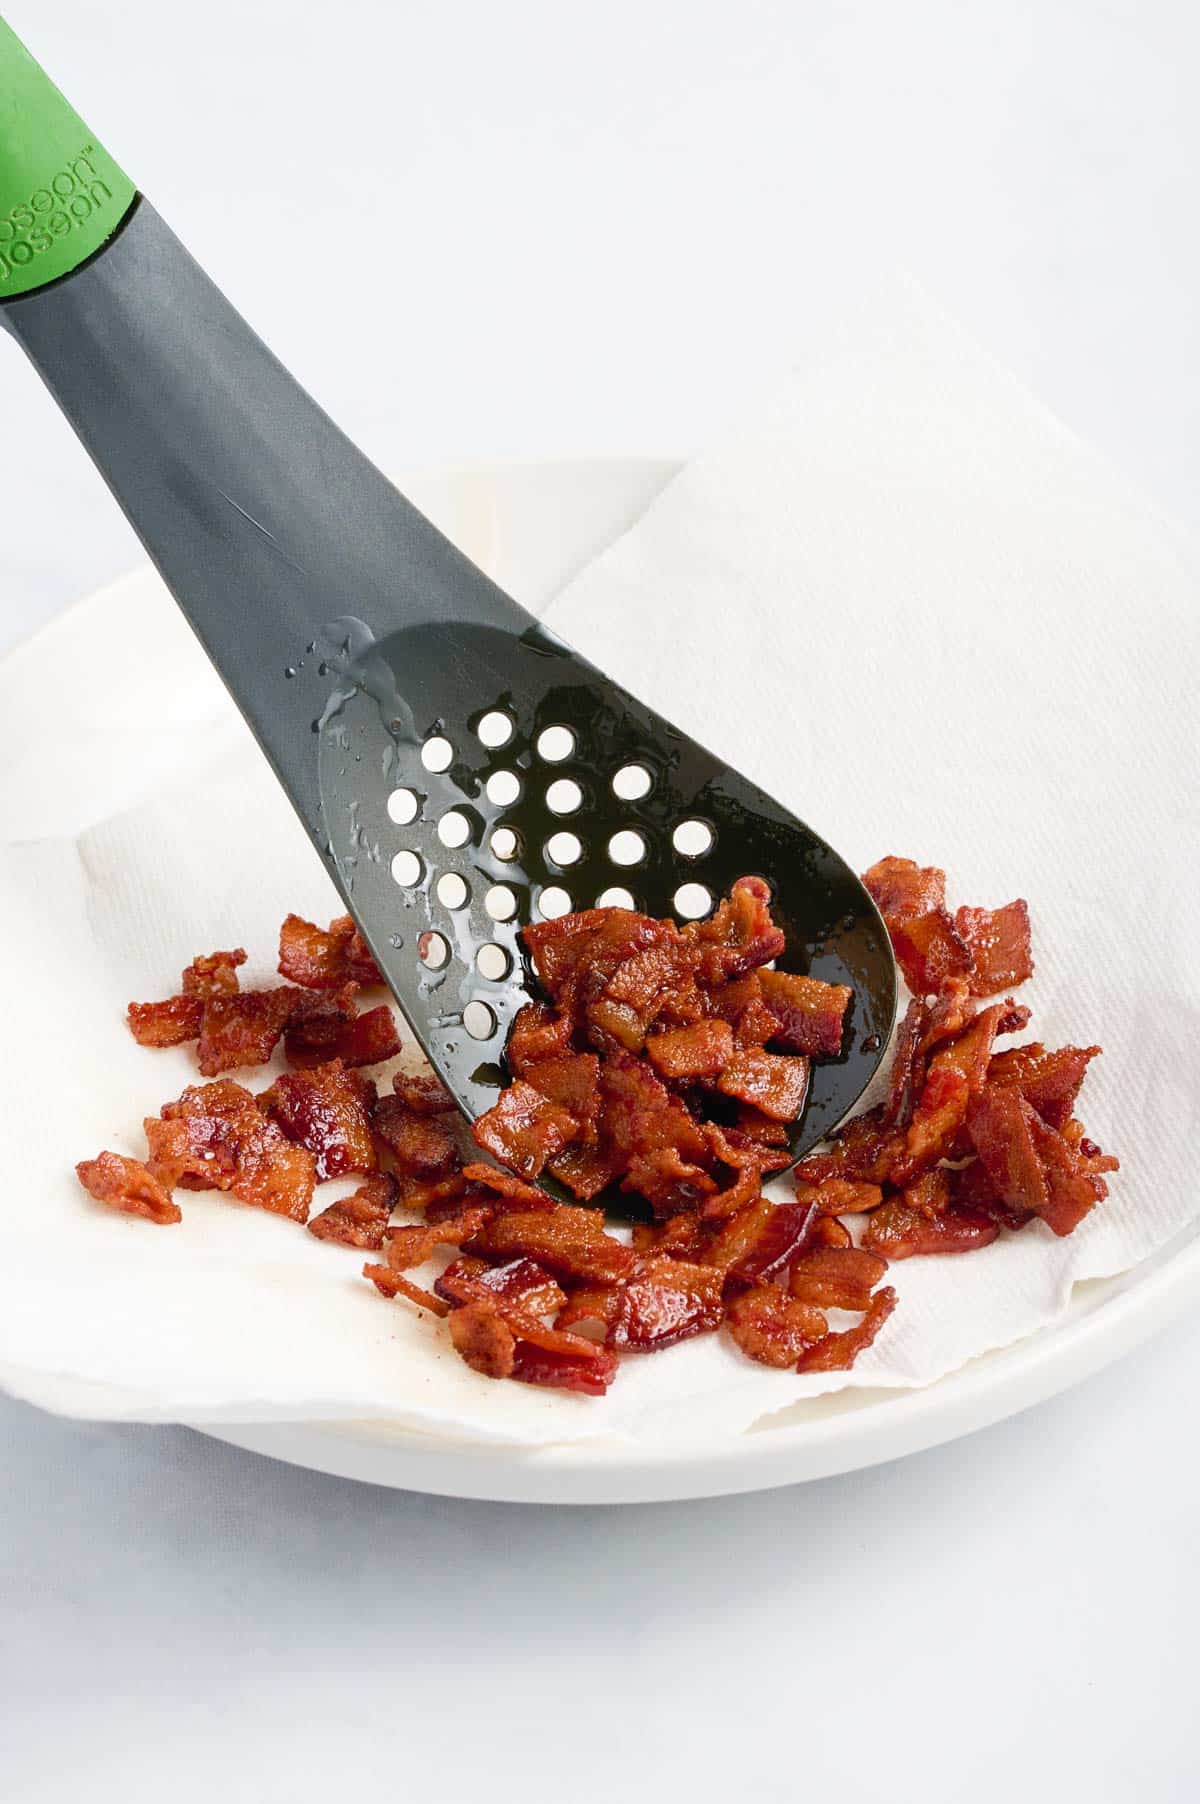 Bacon is scooped onto a plate to drain.